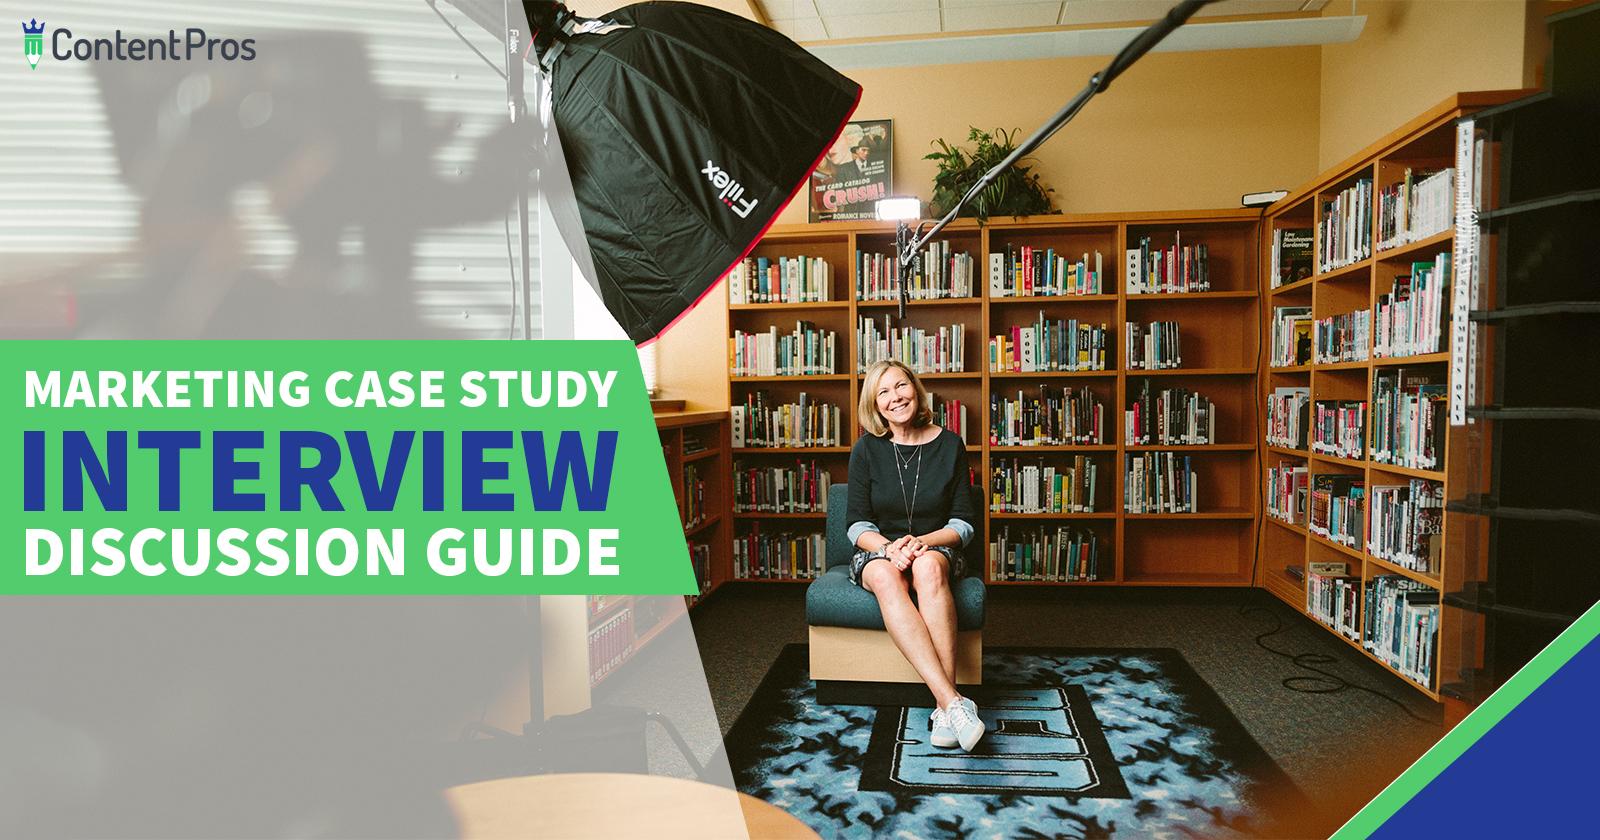 UseCase: Marketing Case Study Interview Discussion Guide - Content Pros